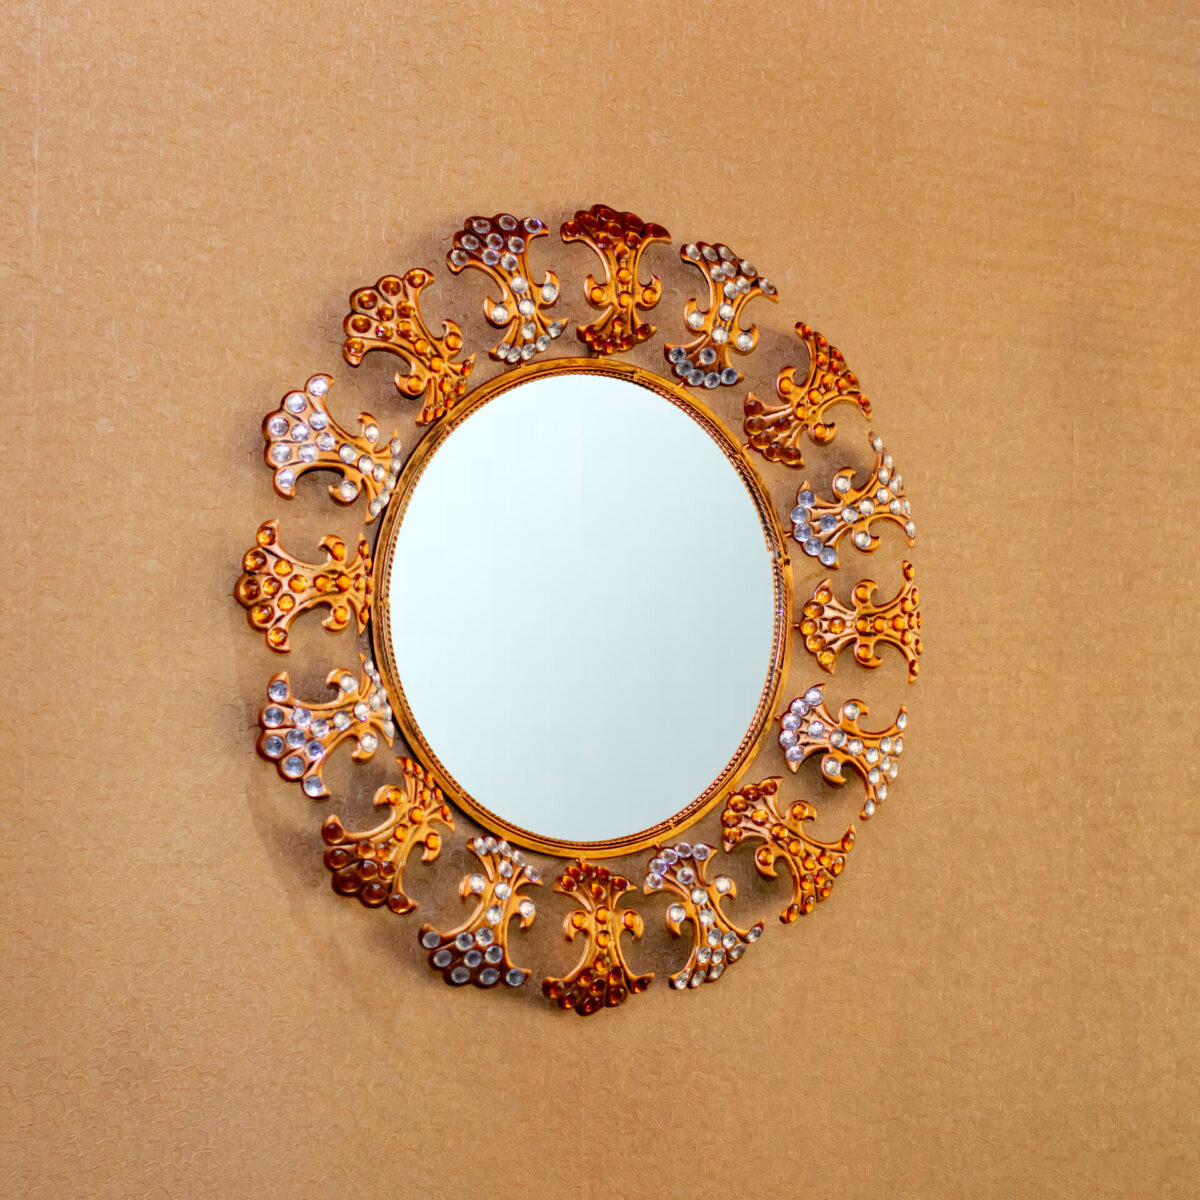 accent-wall-mirror-metal-round-with-filigree-work-and-stones-antique-copper-786703